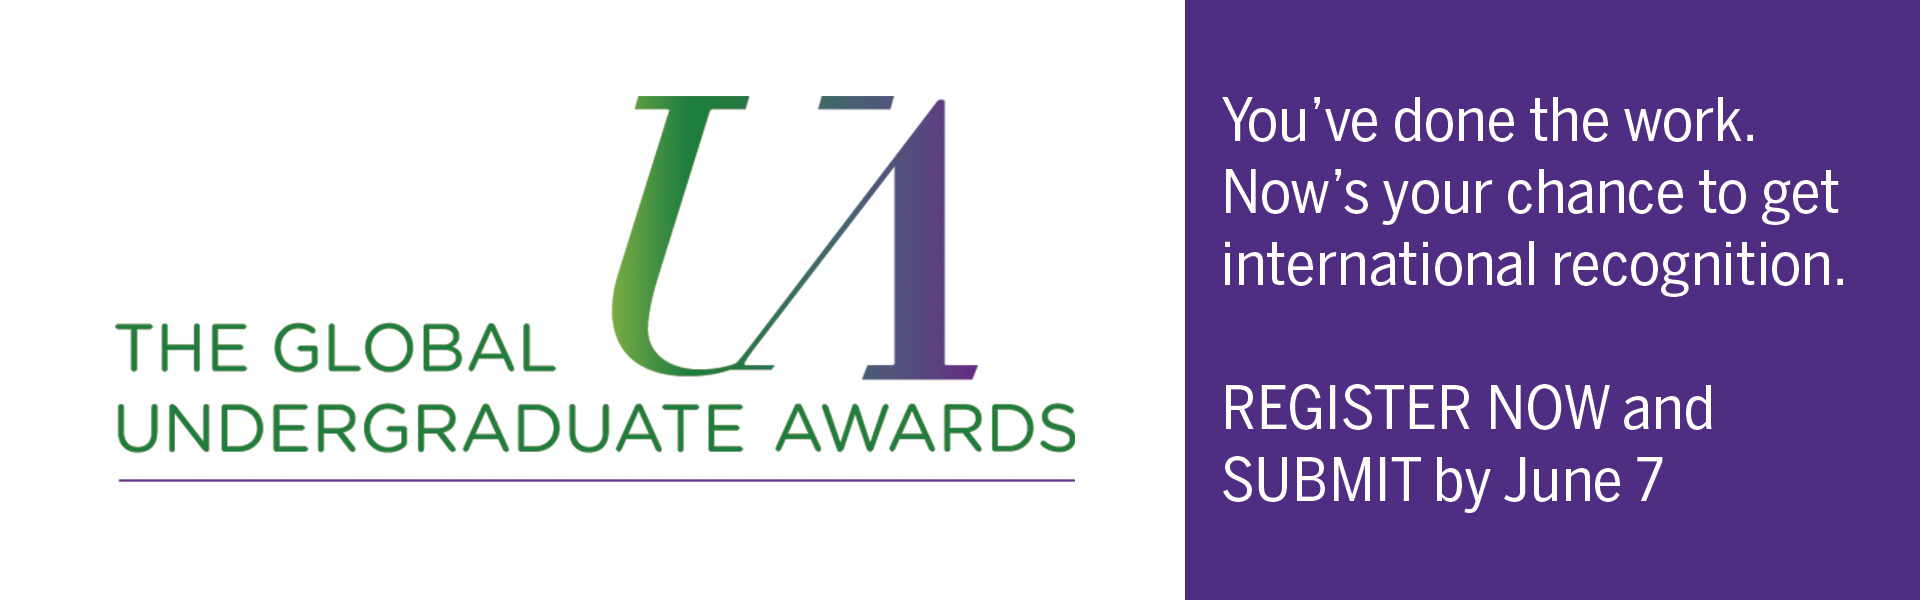 The Global Undergraduate Awards - text that says - "You've done the work. Now's your chance to get international recognition. Register now and submit by June 7"